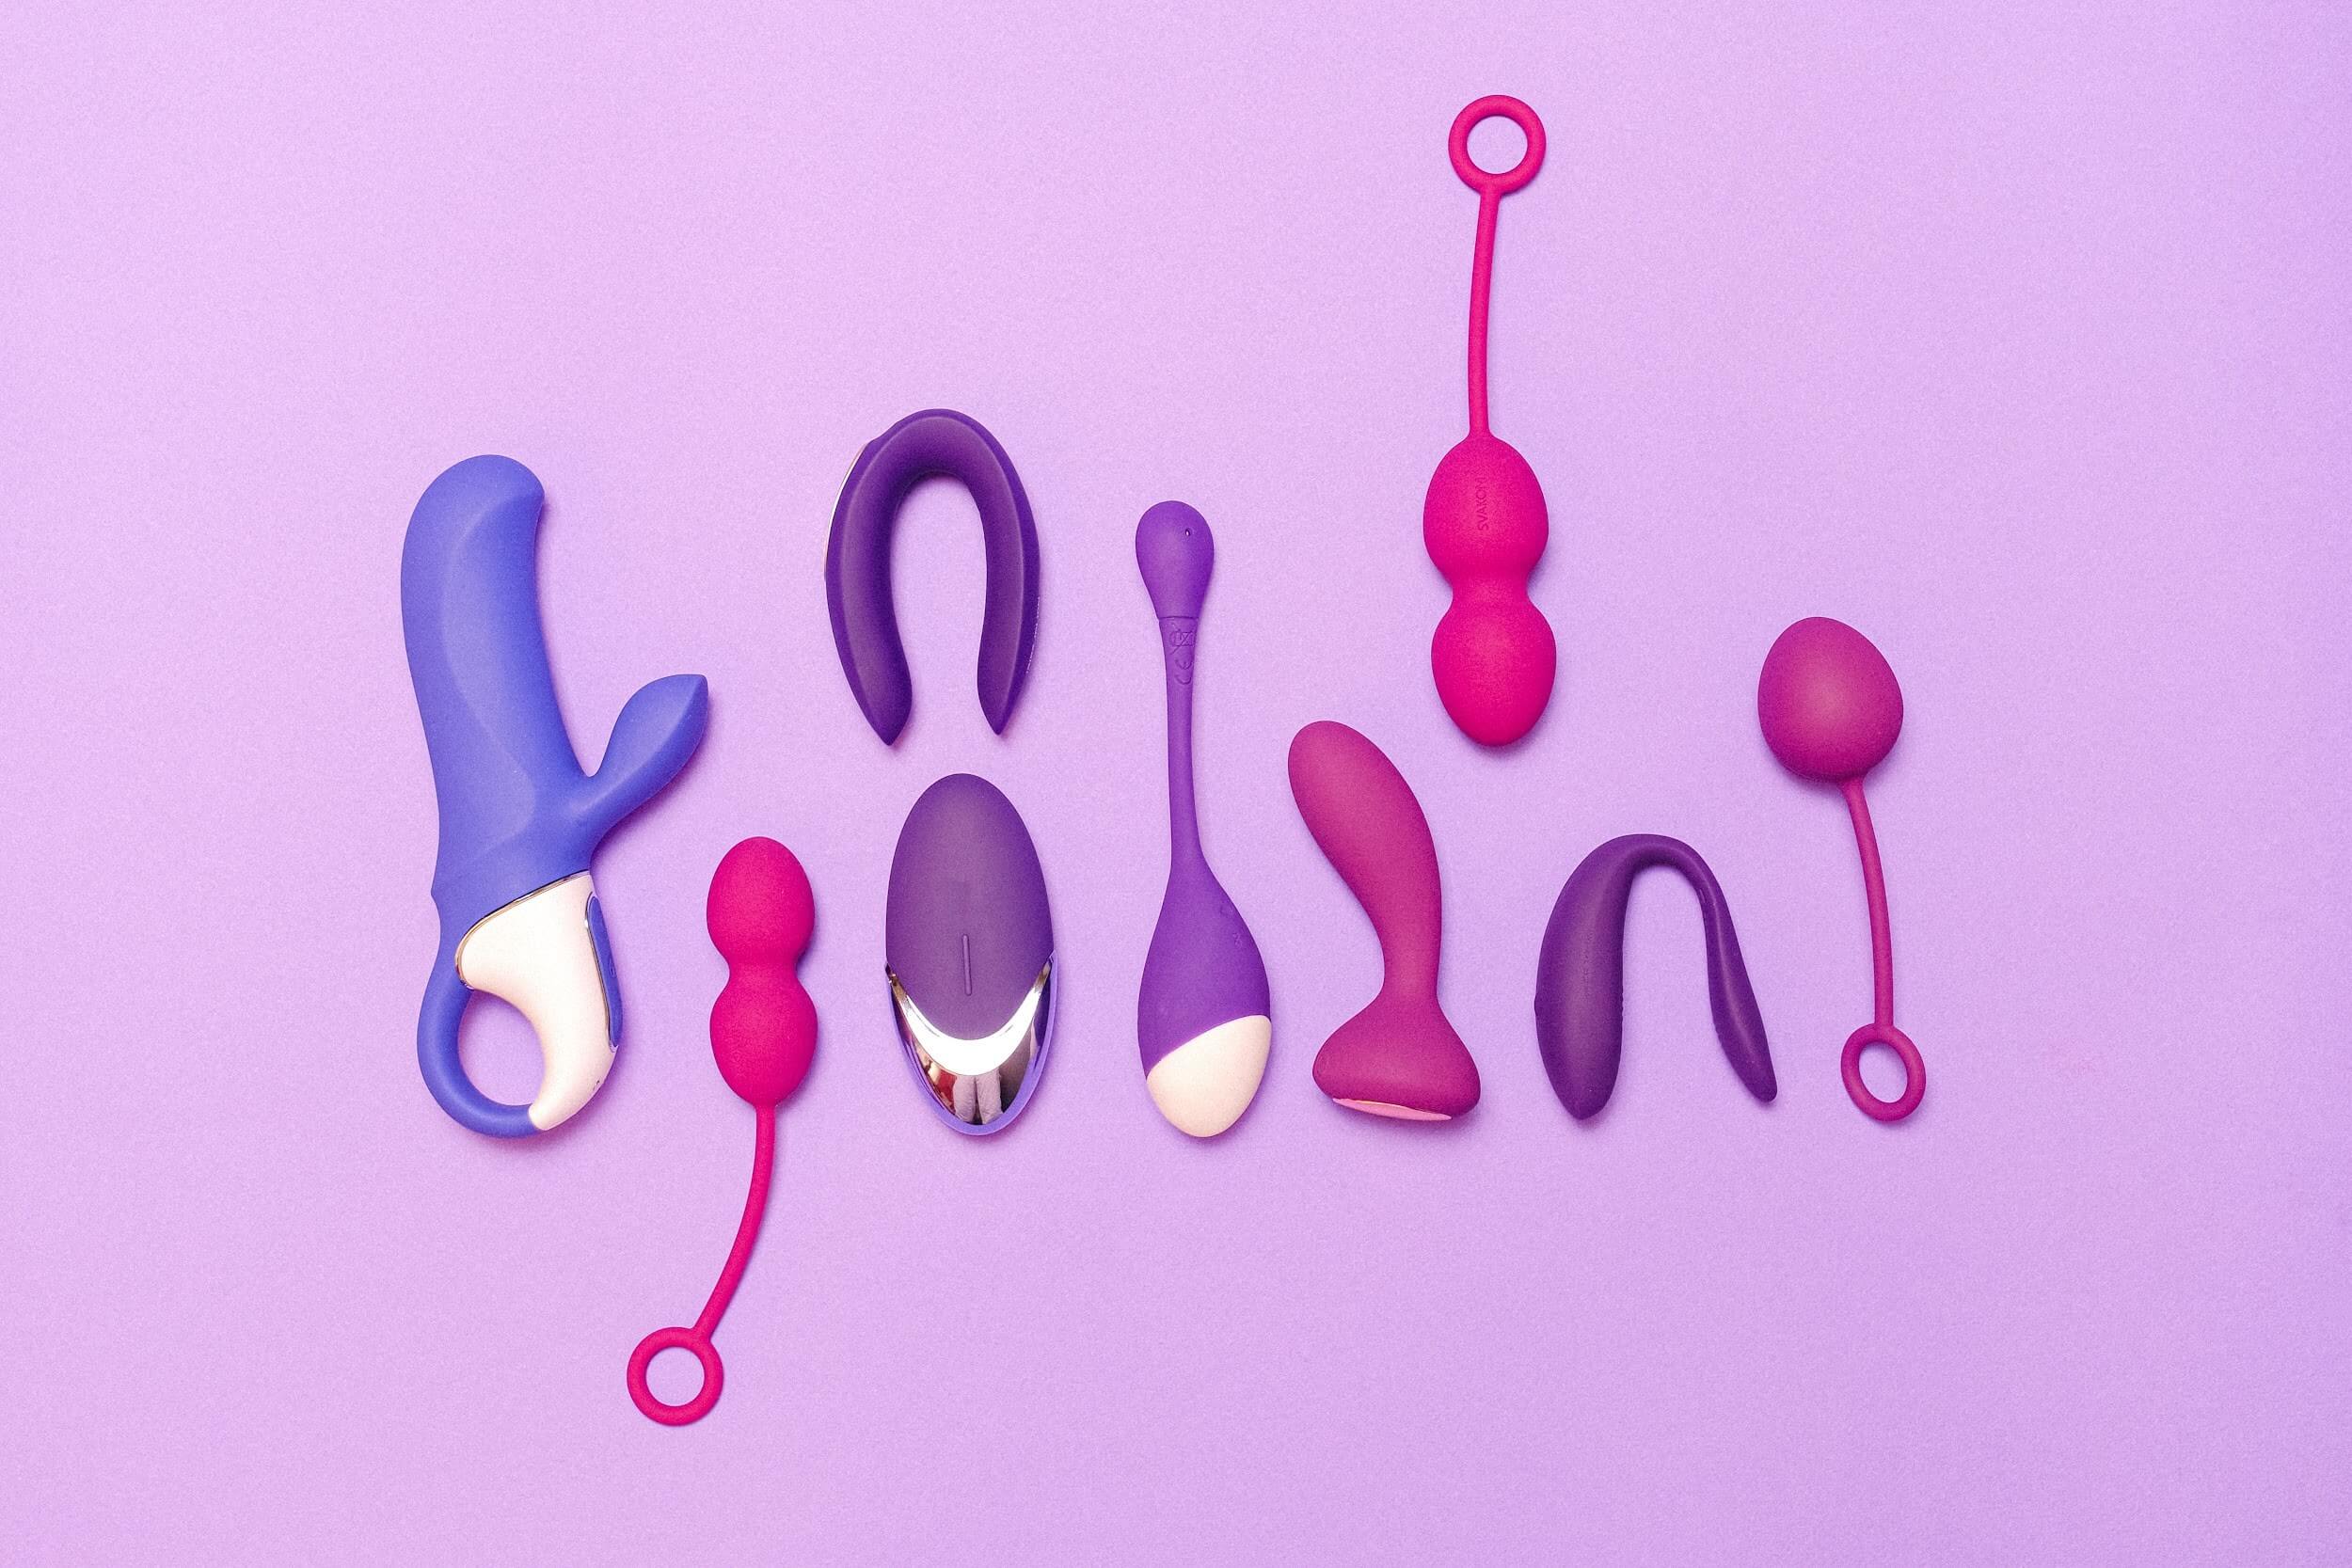 A variety of sex toys